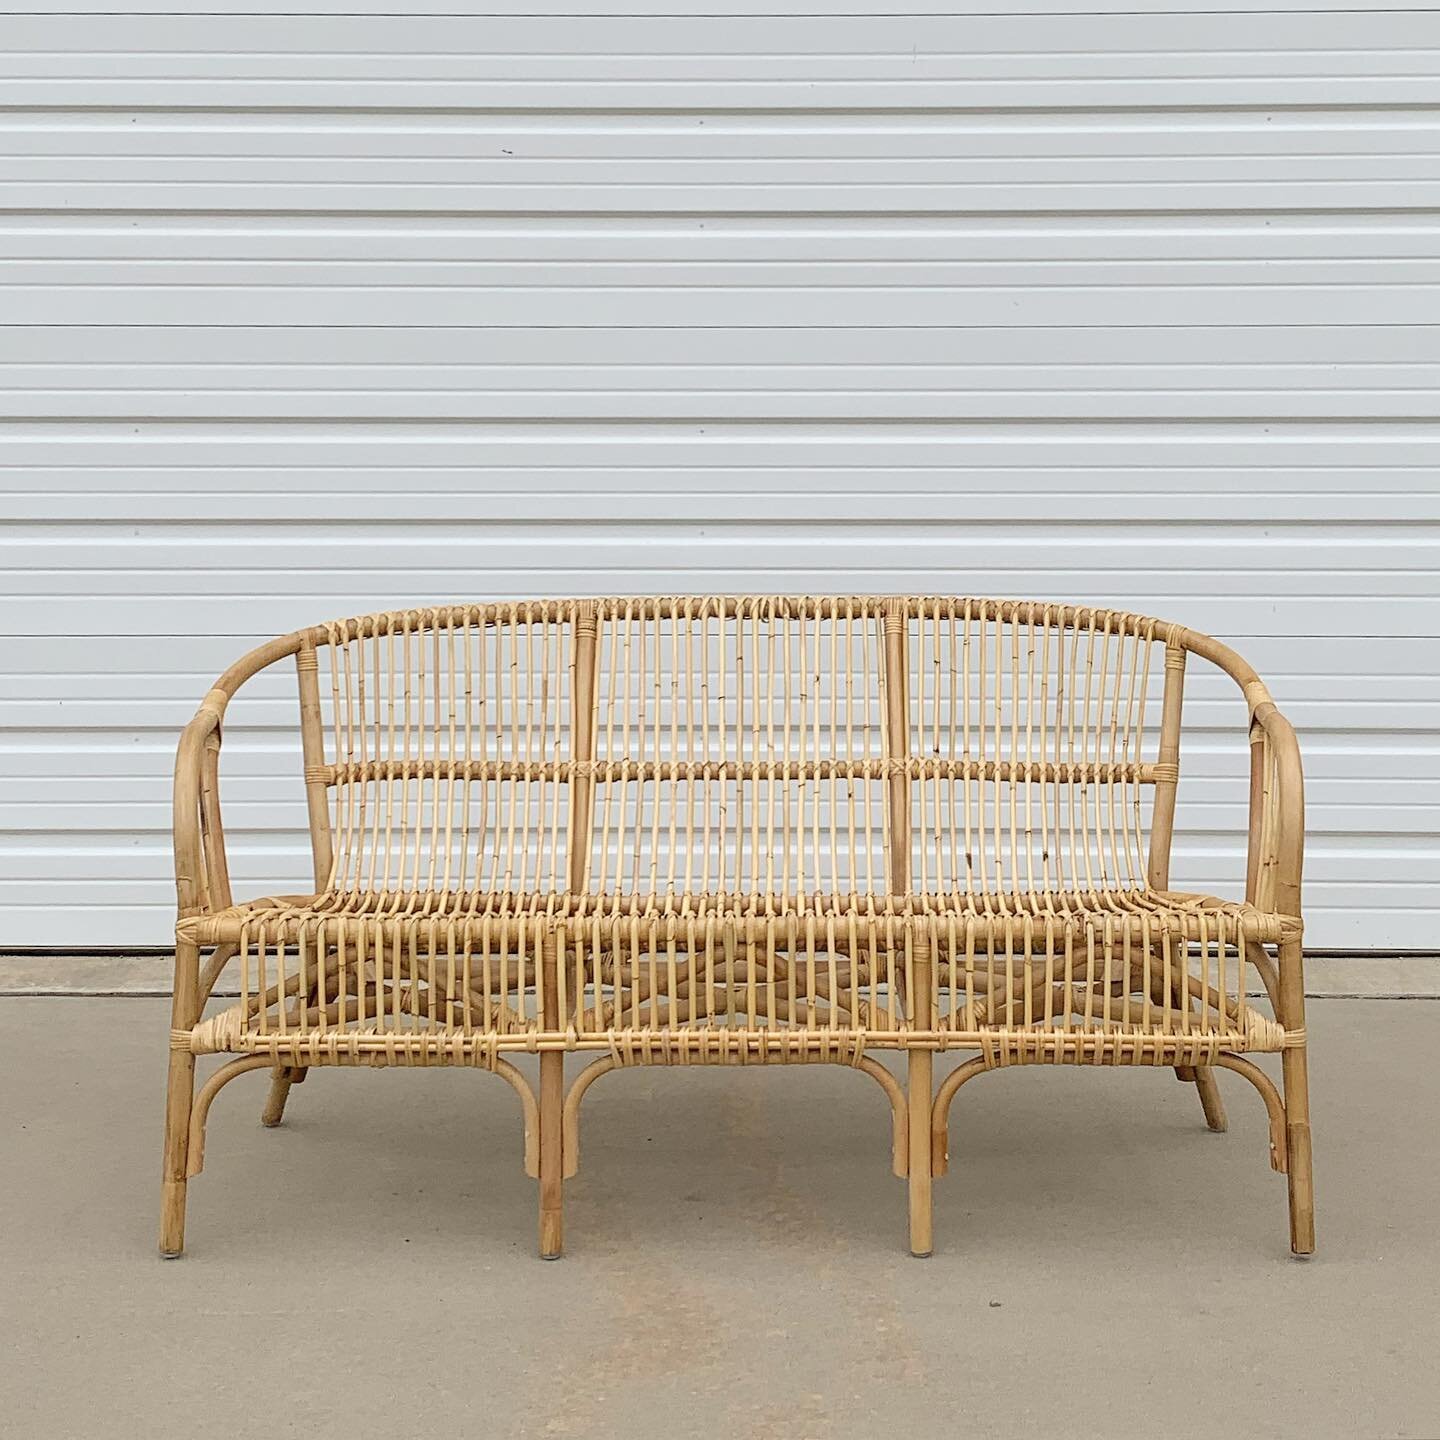 Hello to our new Lenka loveseat!  We are making her a white seat cushion to match our other rattan pieces, but  I&rsquo;m impatient + just wanted to show her off ☺️. Side note- we will have two in inventory soon!